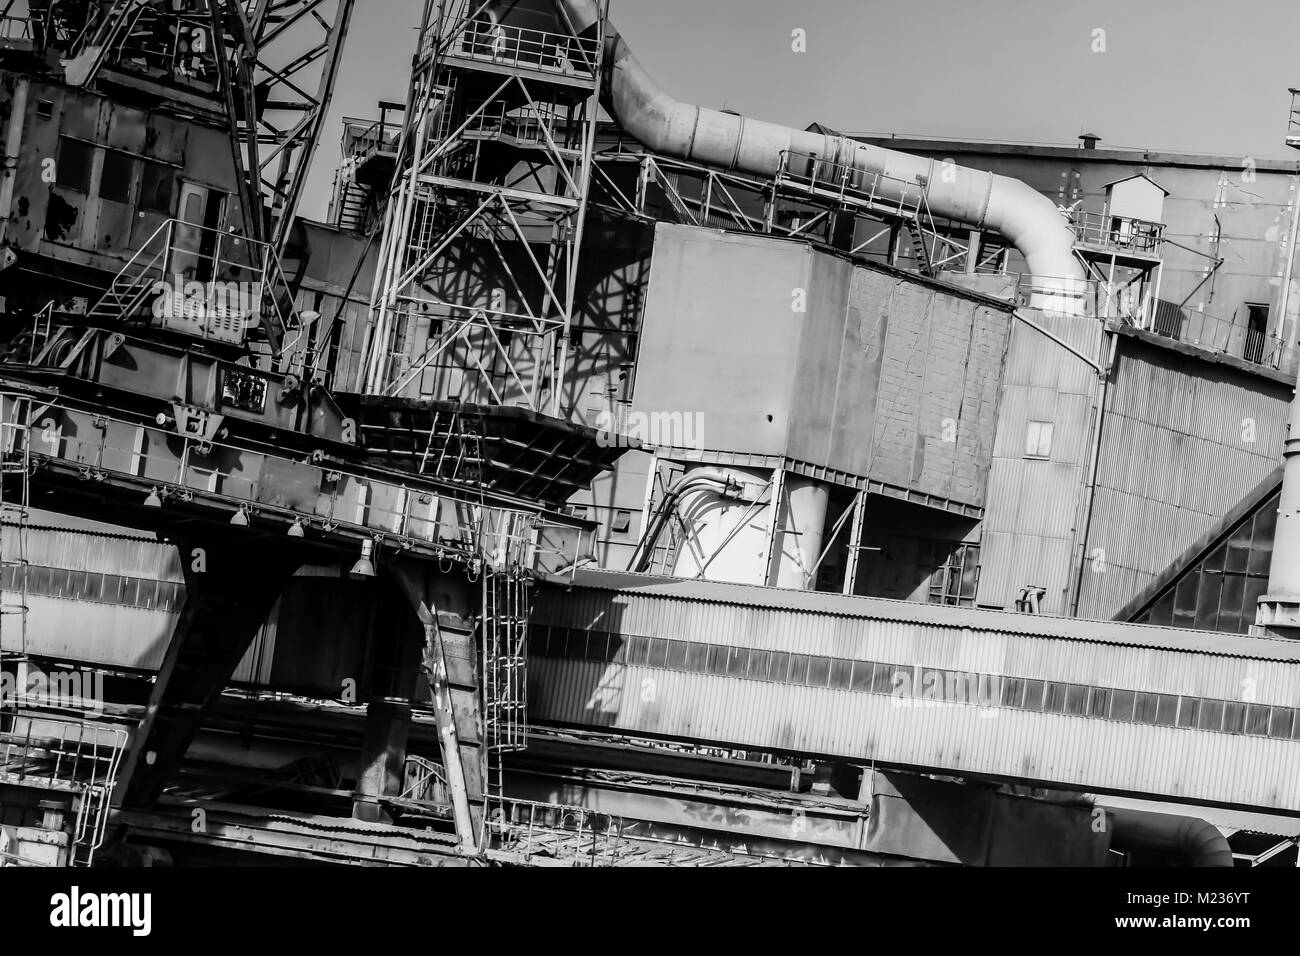 Gdansk shipyard, Poland. Retro style black and white. Cranes, old shipyard buildings, rusty structures. Stock Photo